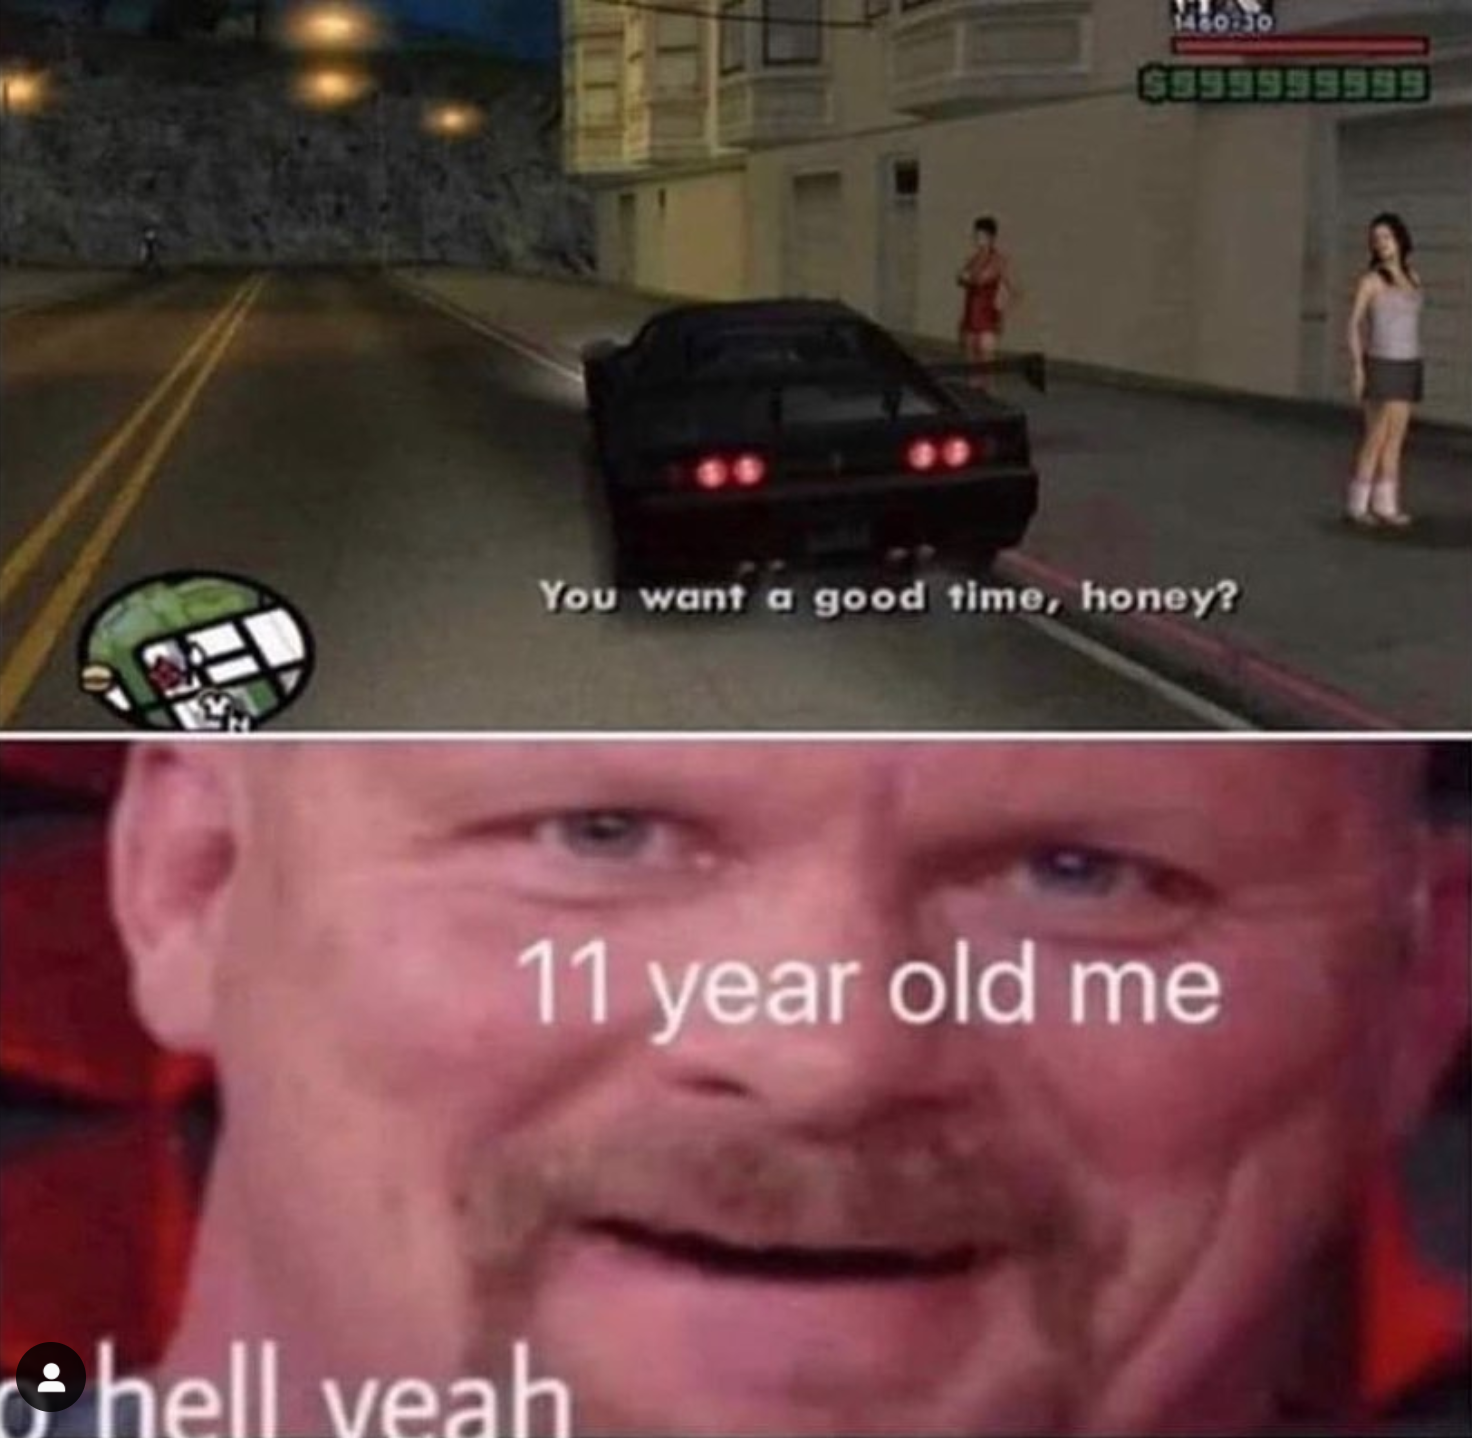 funny gaming memes - funny gta san andreas memes - You want a good time, honey? 11 year old me hell veah